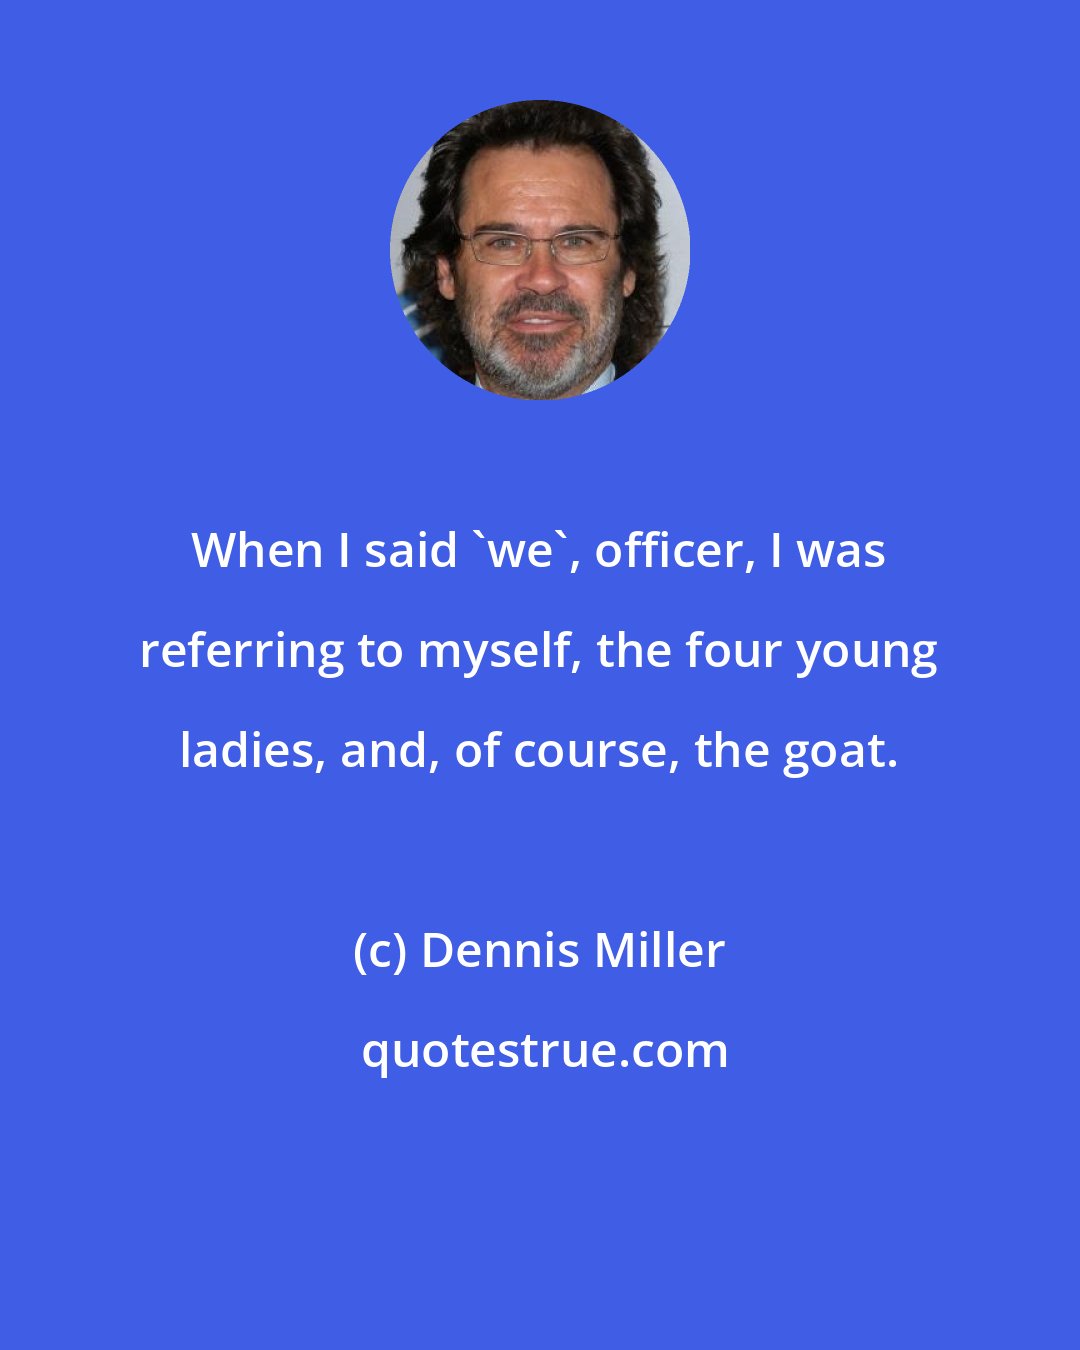 Dennis Miller: When I said 'we', officer, I was referring to myself, the four young ladies, and, of course, the goat.